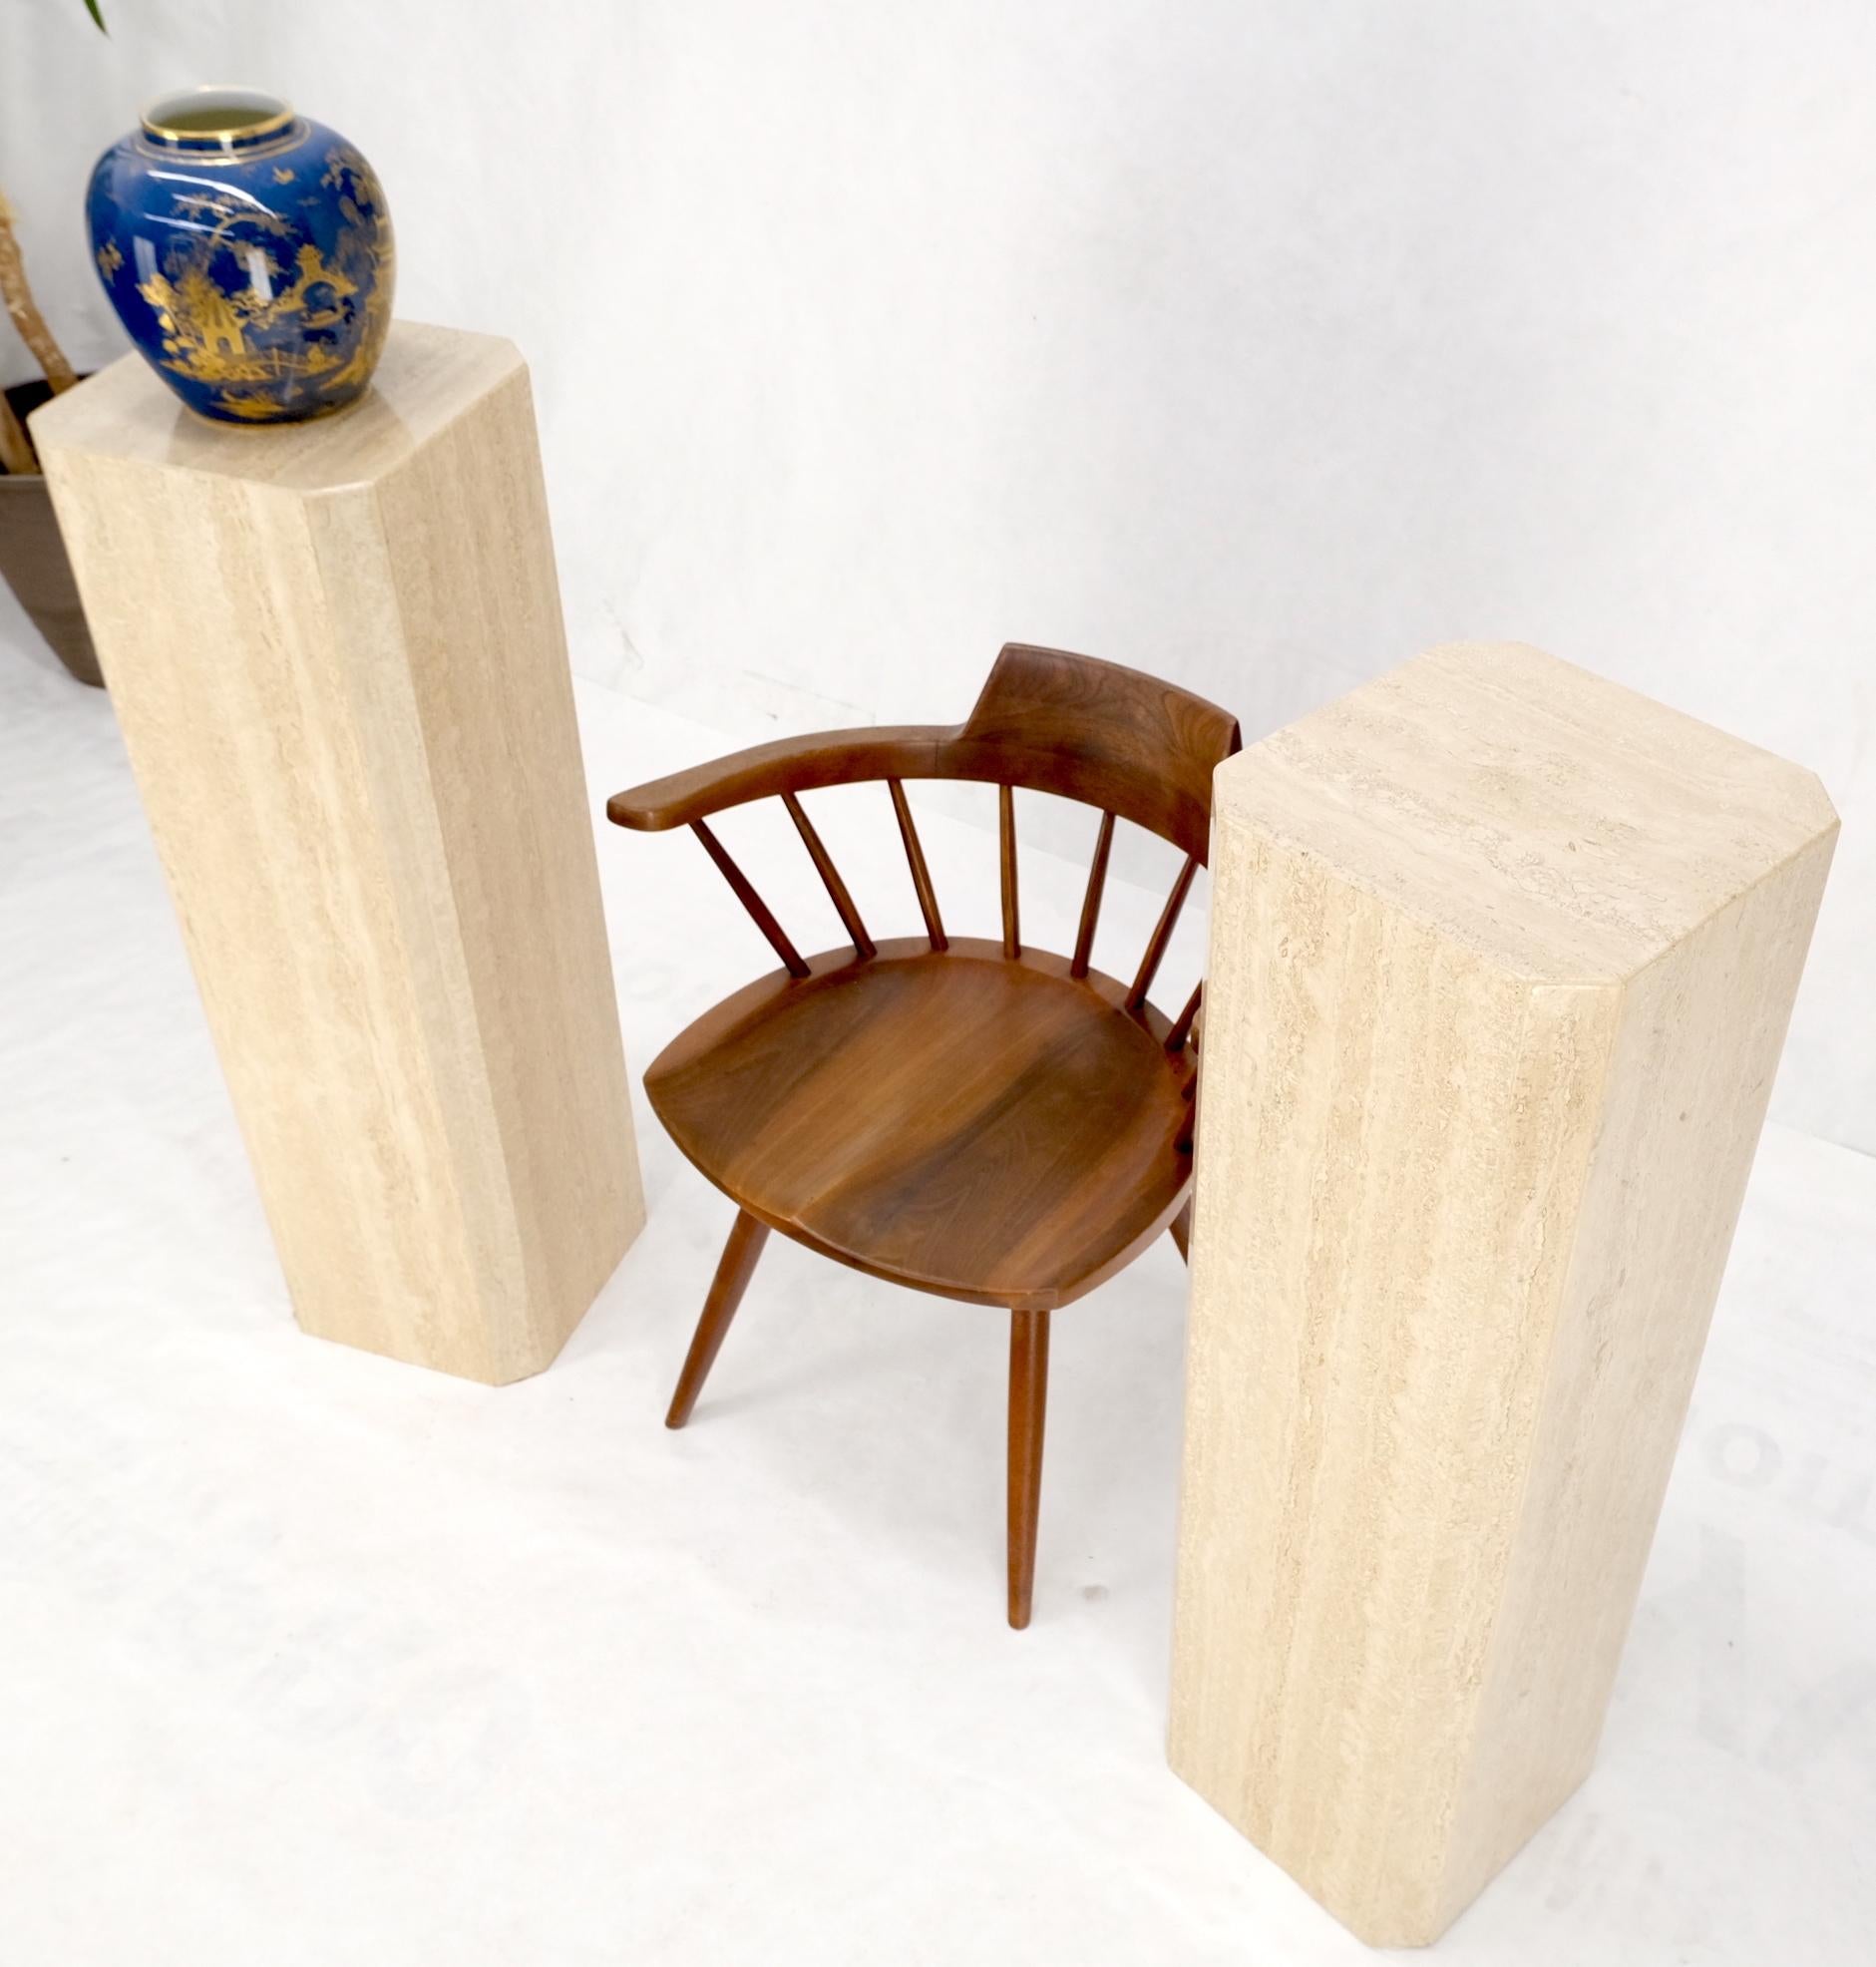 Pair of tall large square Italian Travertine pedestals stands.